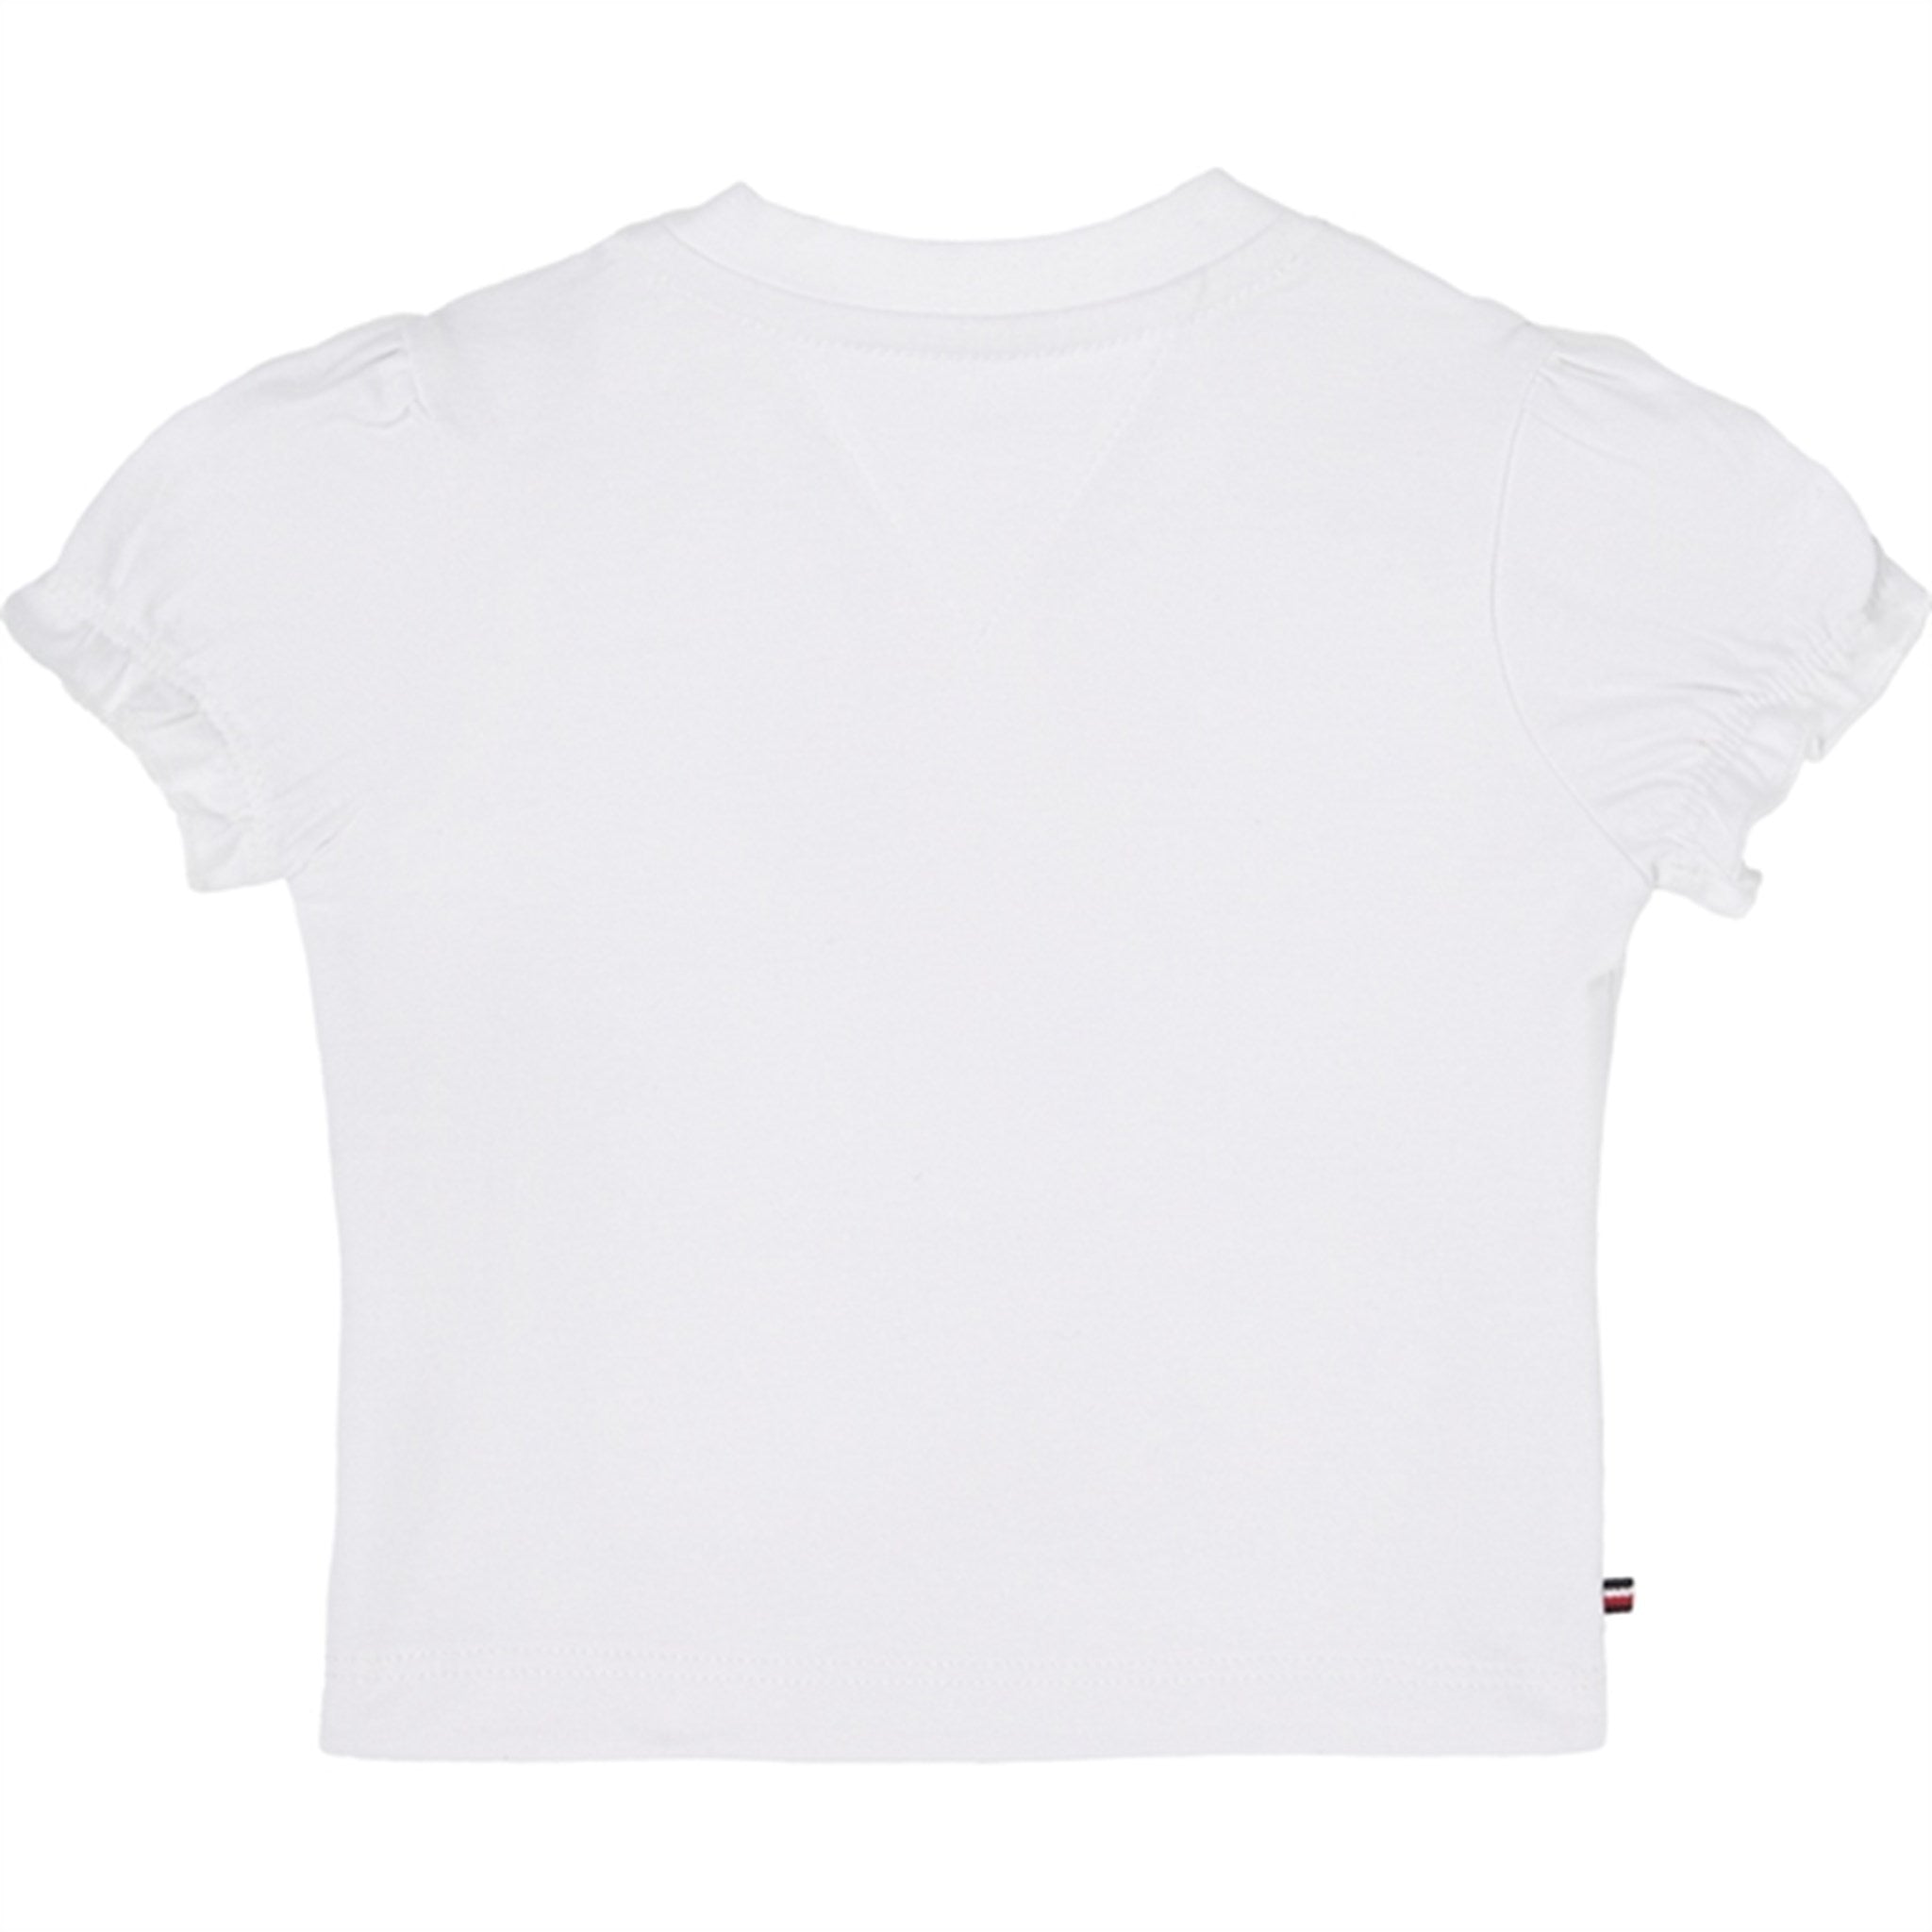 Tommy Hilfiger Baby Ruffle Gingham Flag T-Shirt White 3